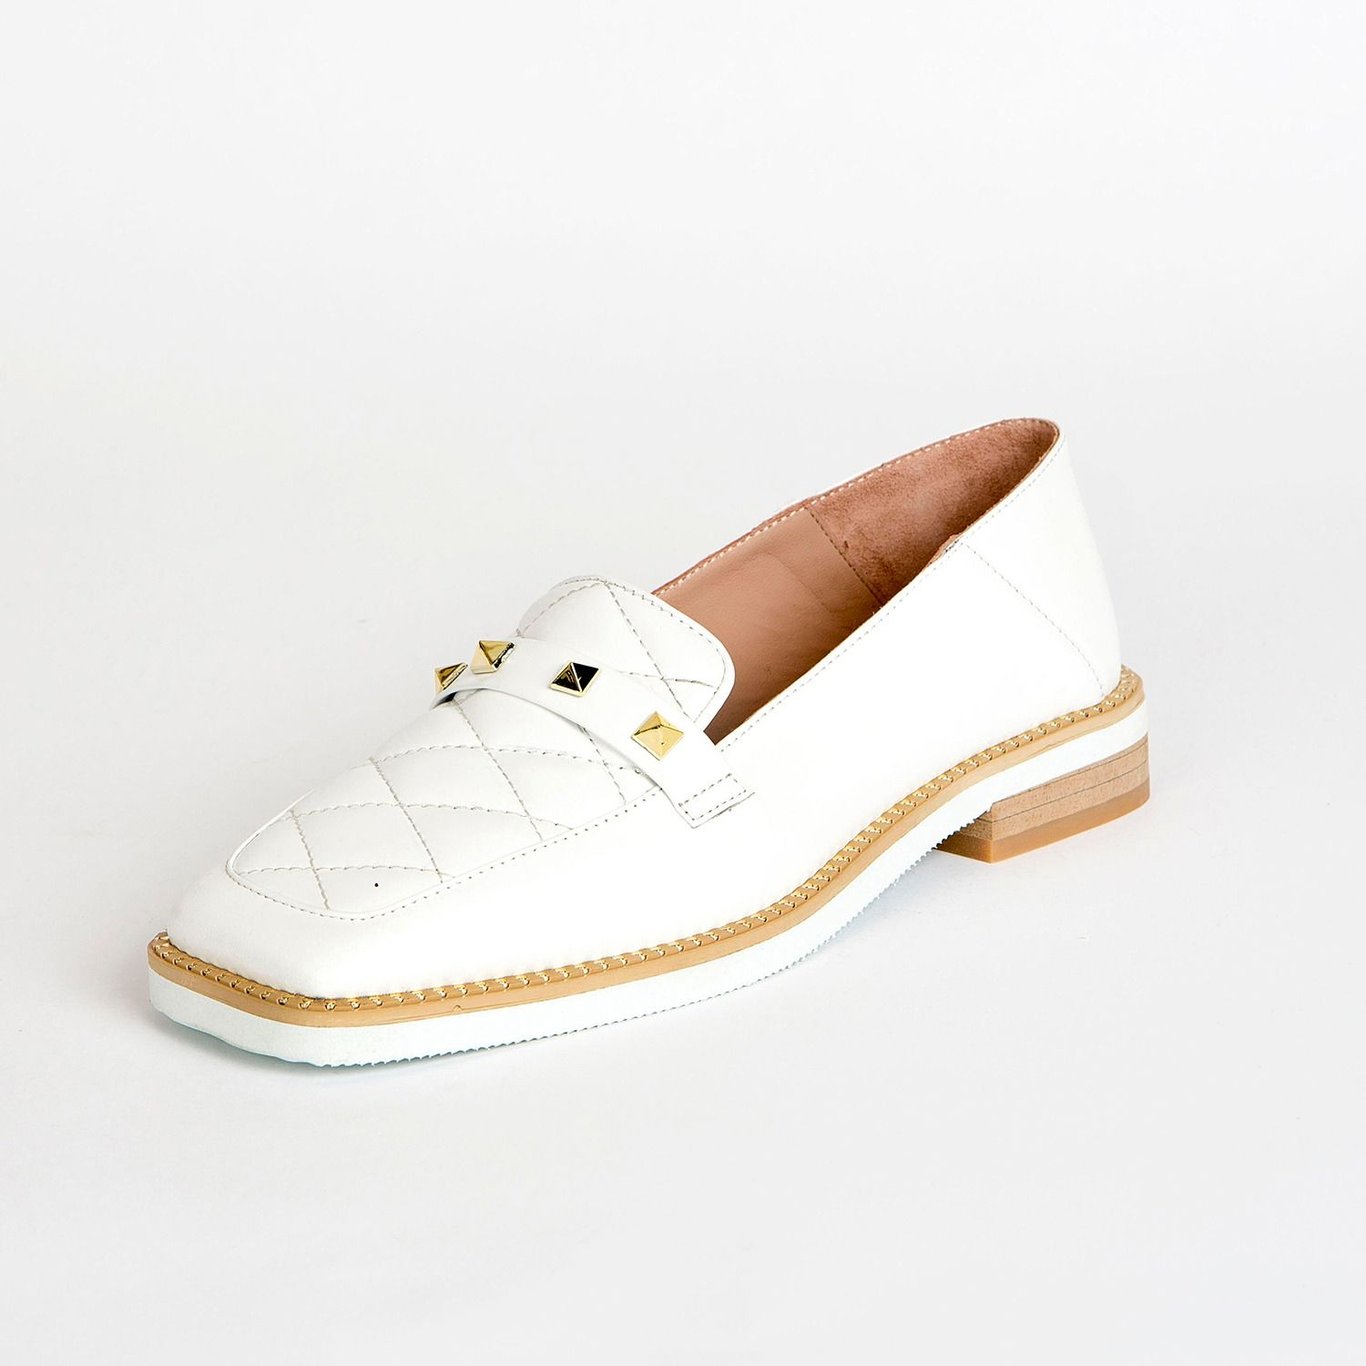 white leather comfort shoes with beautiful accessory